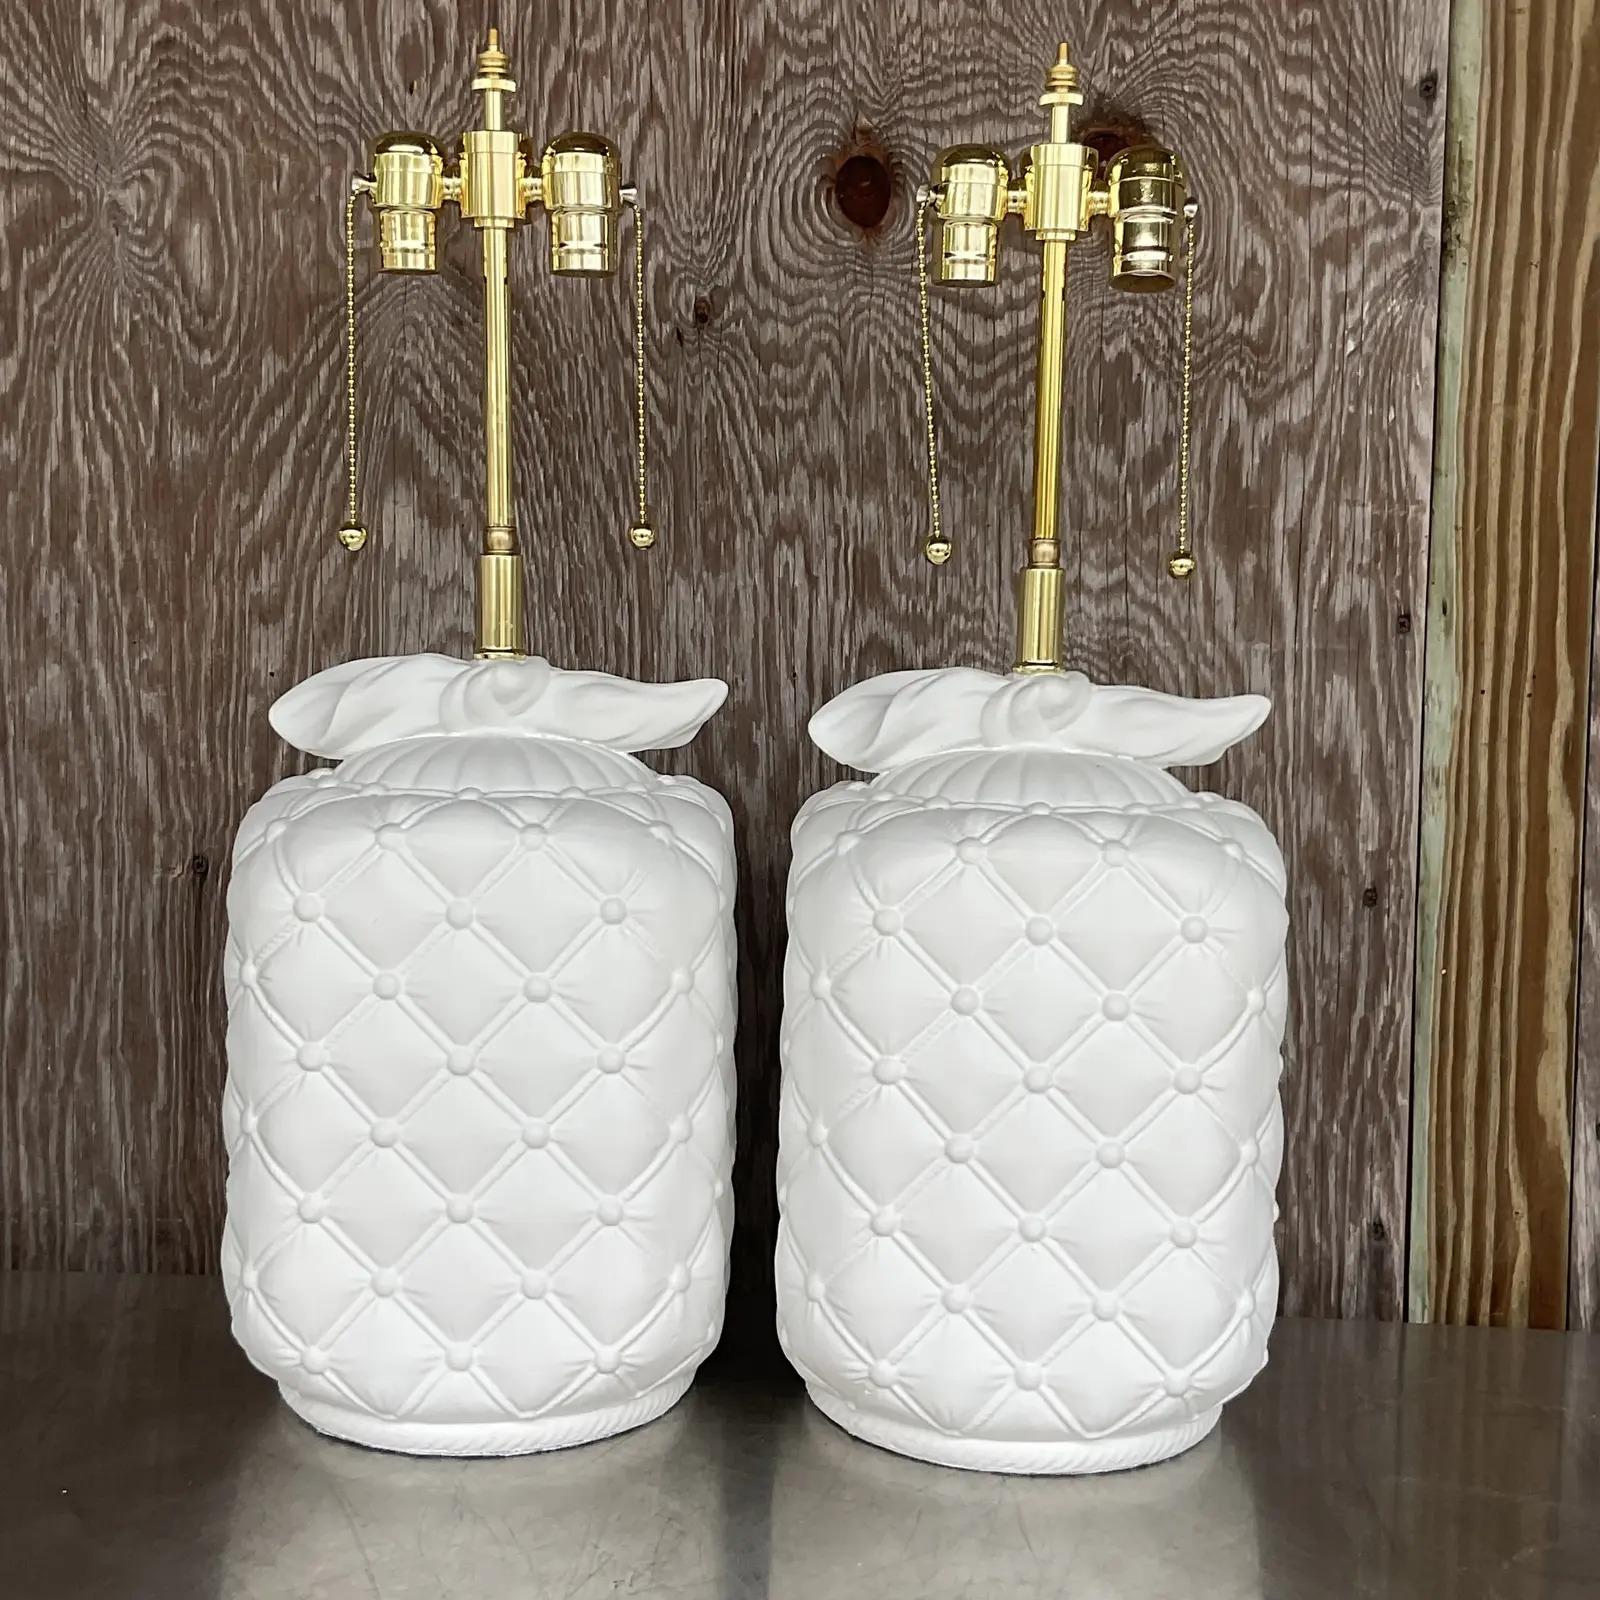 A fabulous pair of vintage table lamps. Chic plaster body with a chic quilted design. Tie detail at the top. Fully restored with all new wiring and hardware. Acquired from a Palm Beach estate.